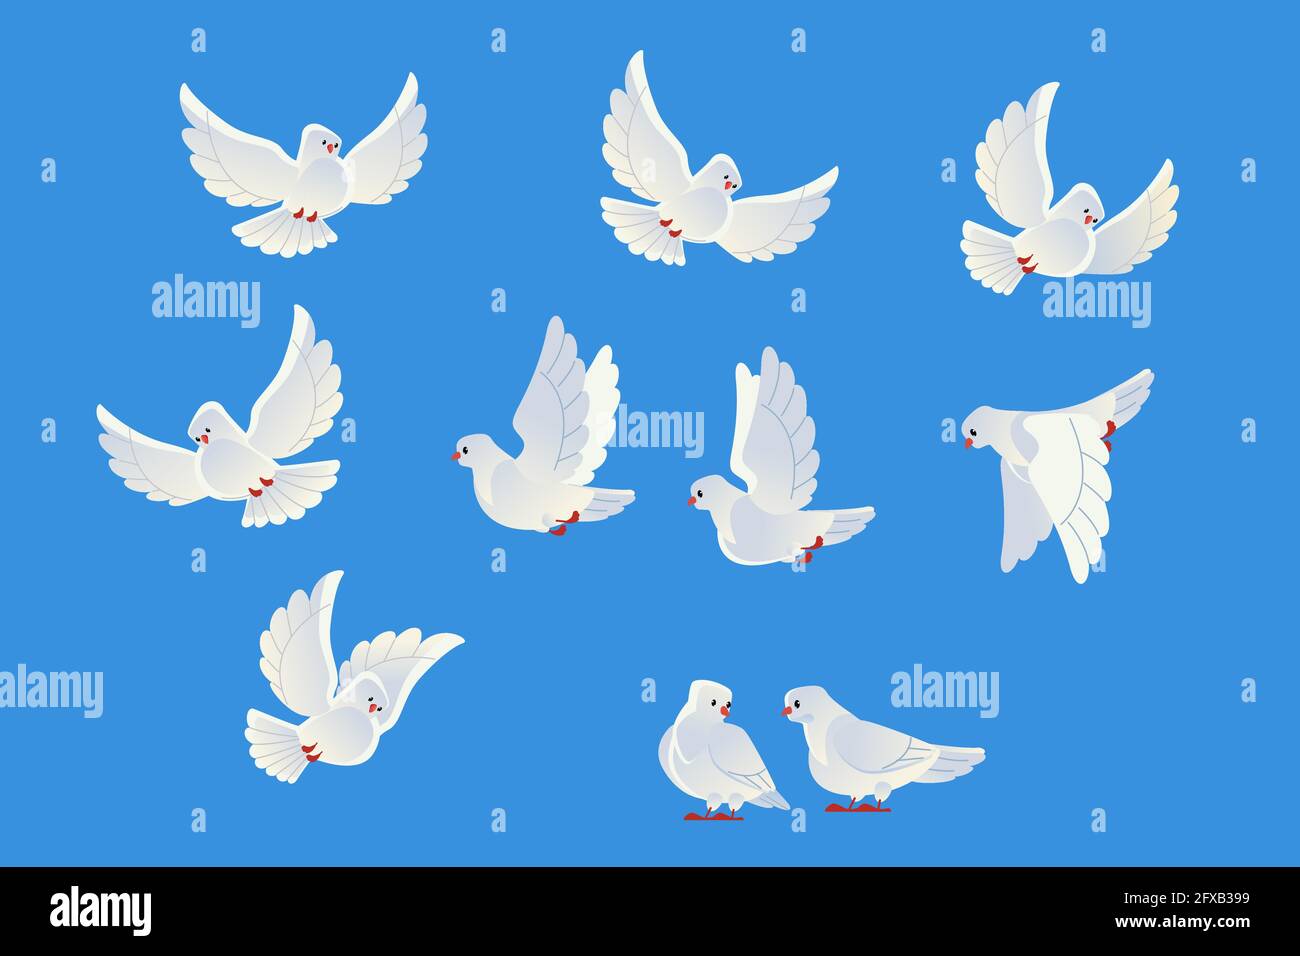 White doves. Beautiful pigeons faith and love symbol. Cartoon style. Isolated on blue background. Vector illustration. Stock Vector